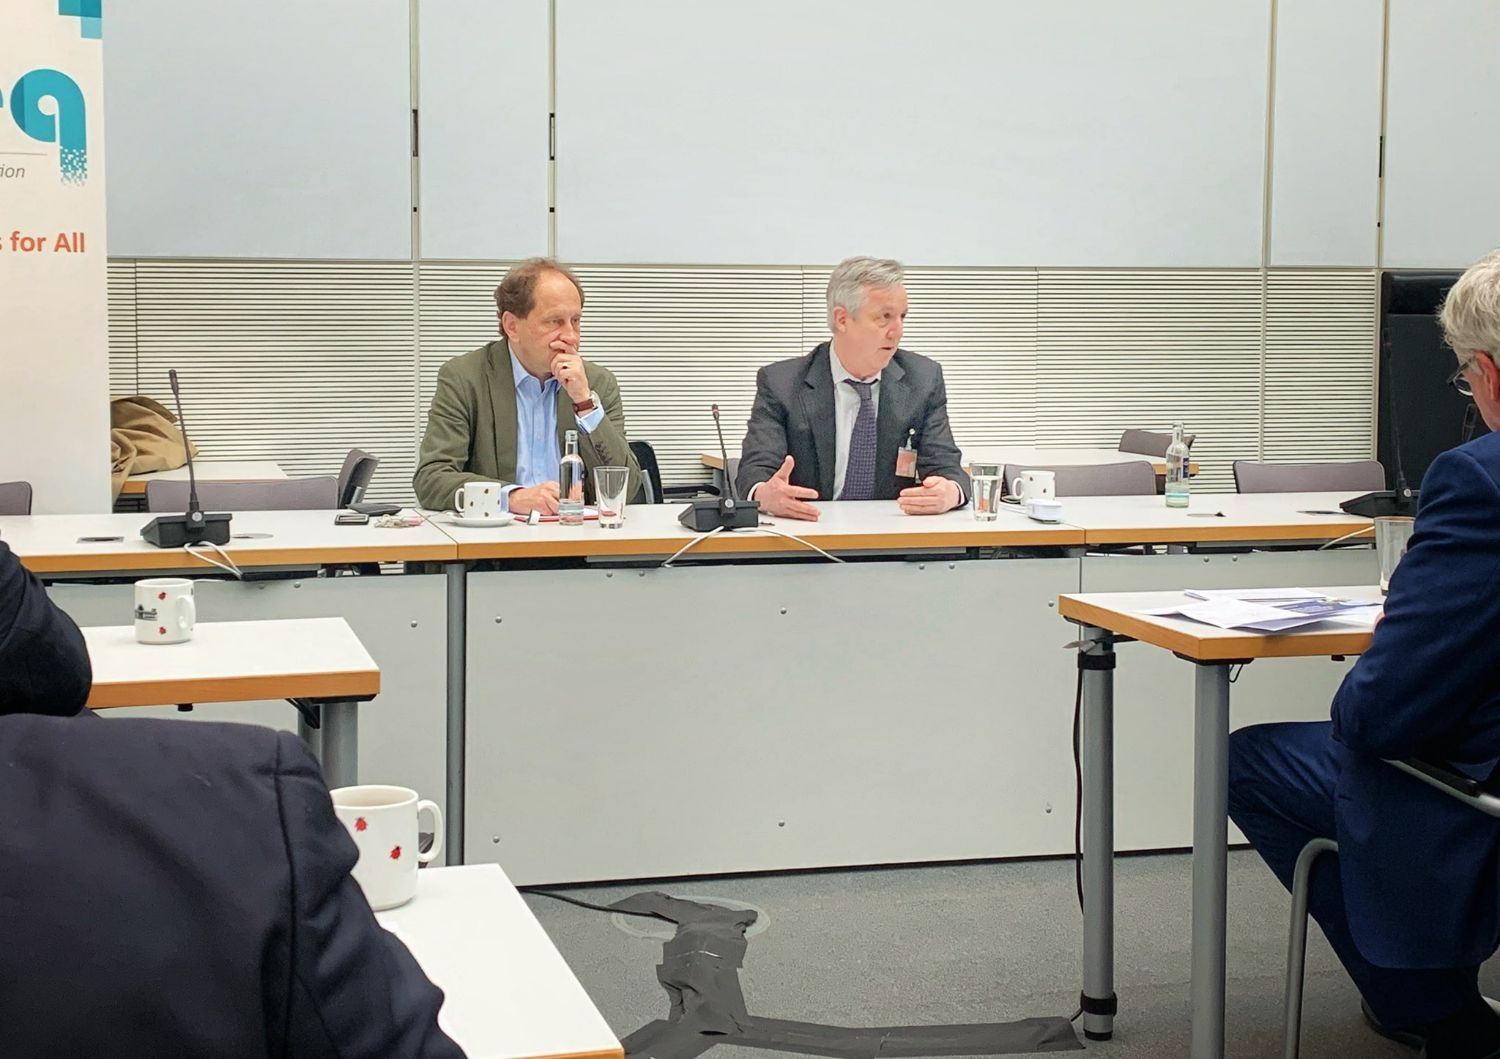 Left to right, MP Lambsdorff and IFES President Tony Banbury at Bundestag